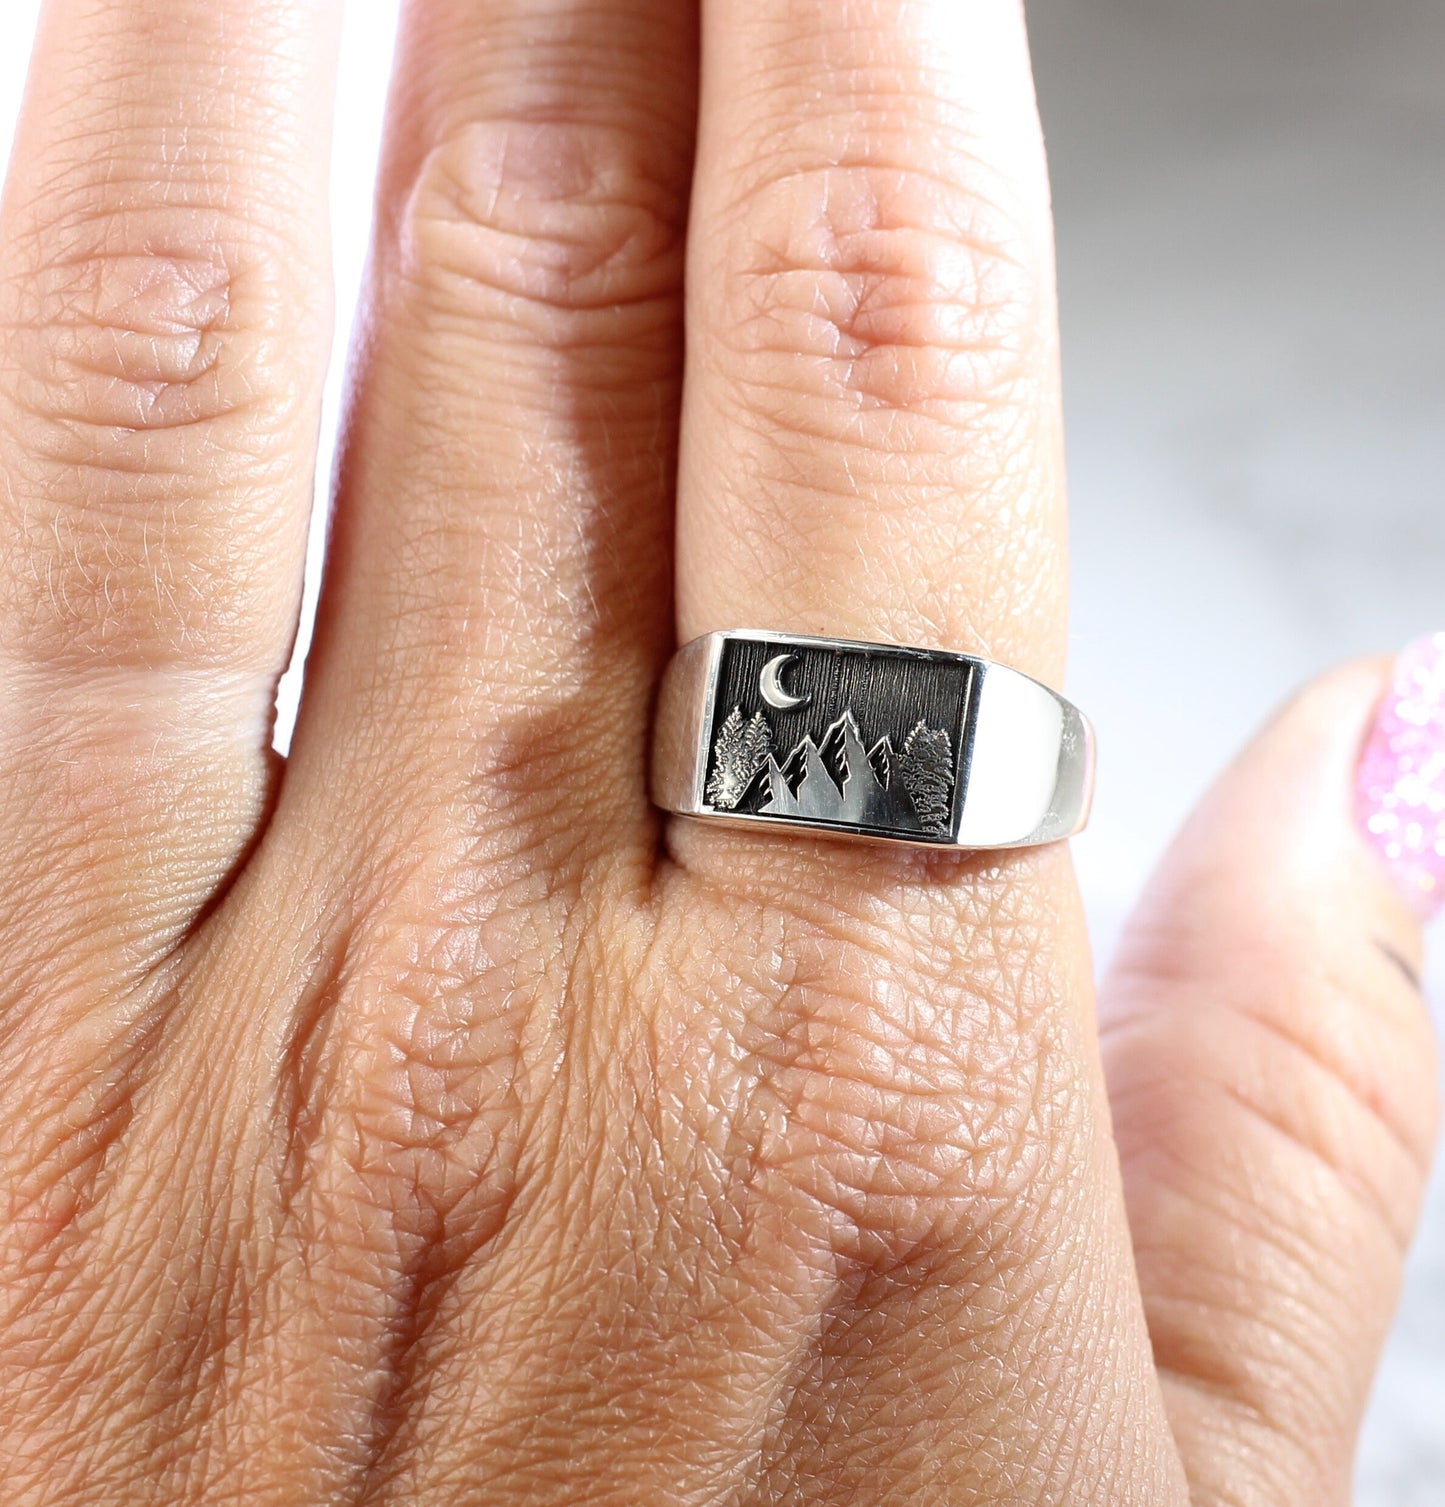 Sterling Silver Mountain Ring // Large Ring with Engraved Mountains and Crescent Moon // Men's Ring